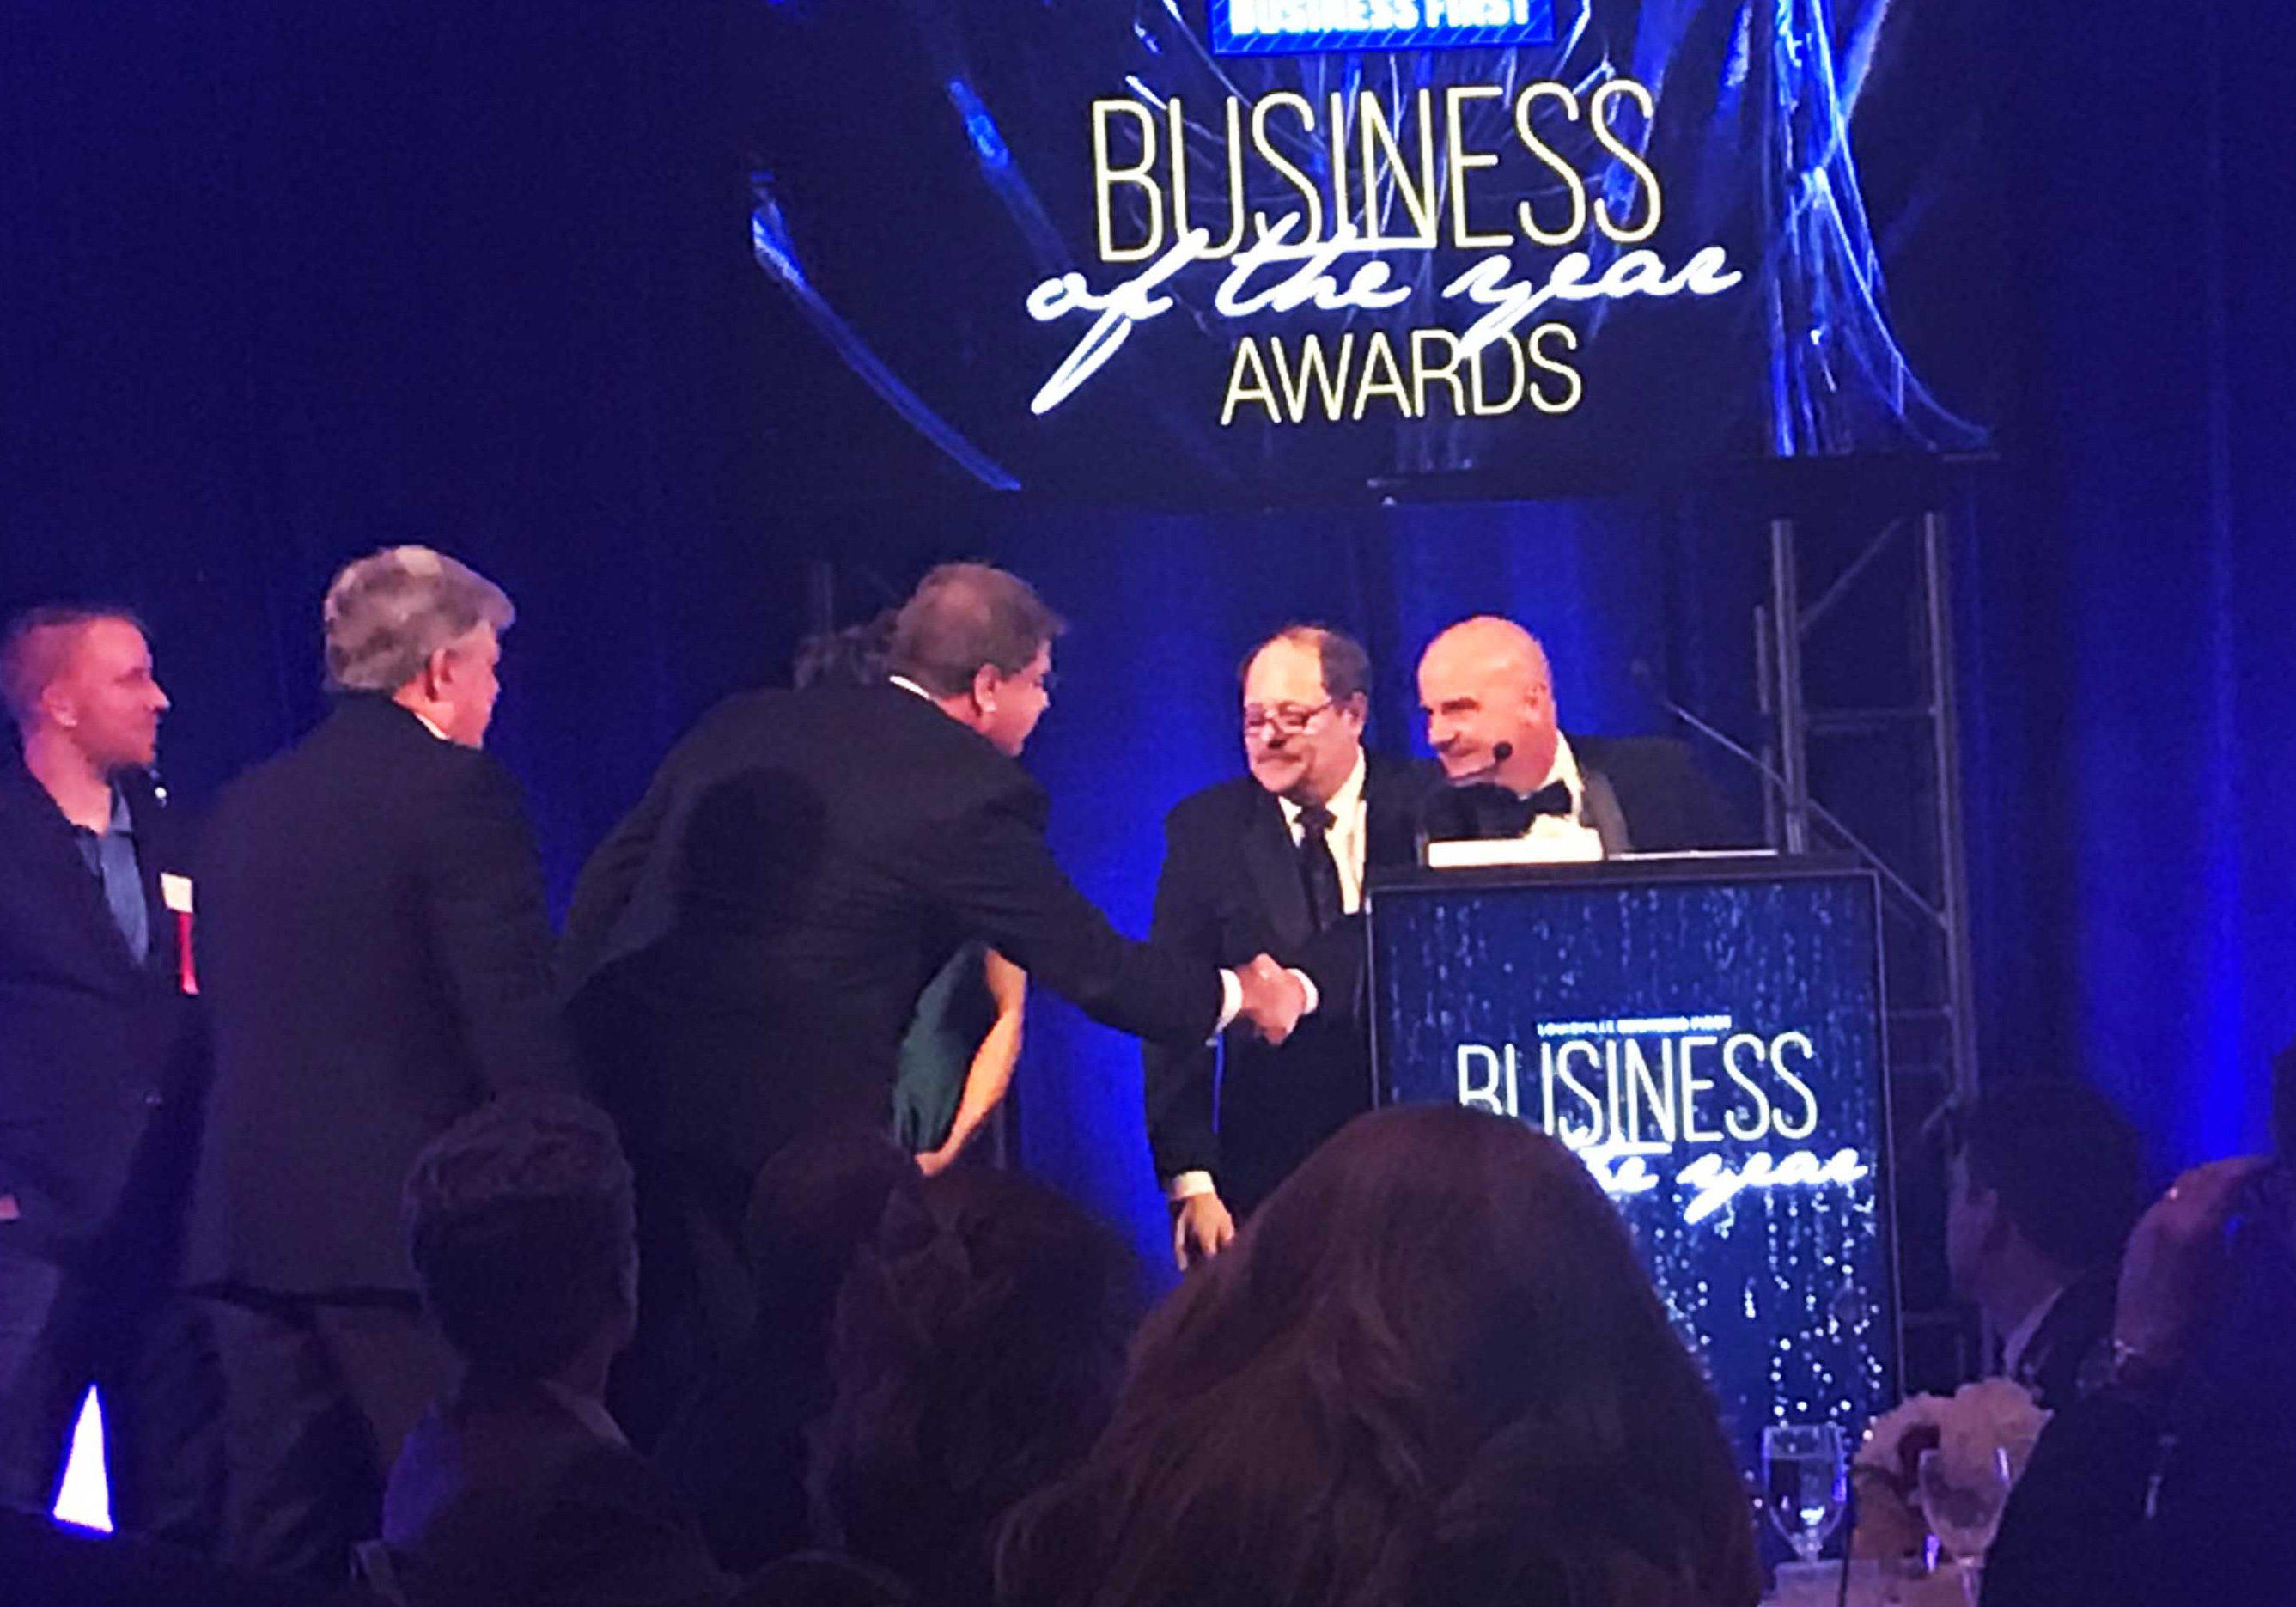 Miles Lee accepts the "Business of the Year" award in December 2018